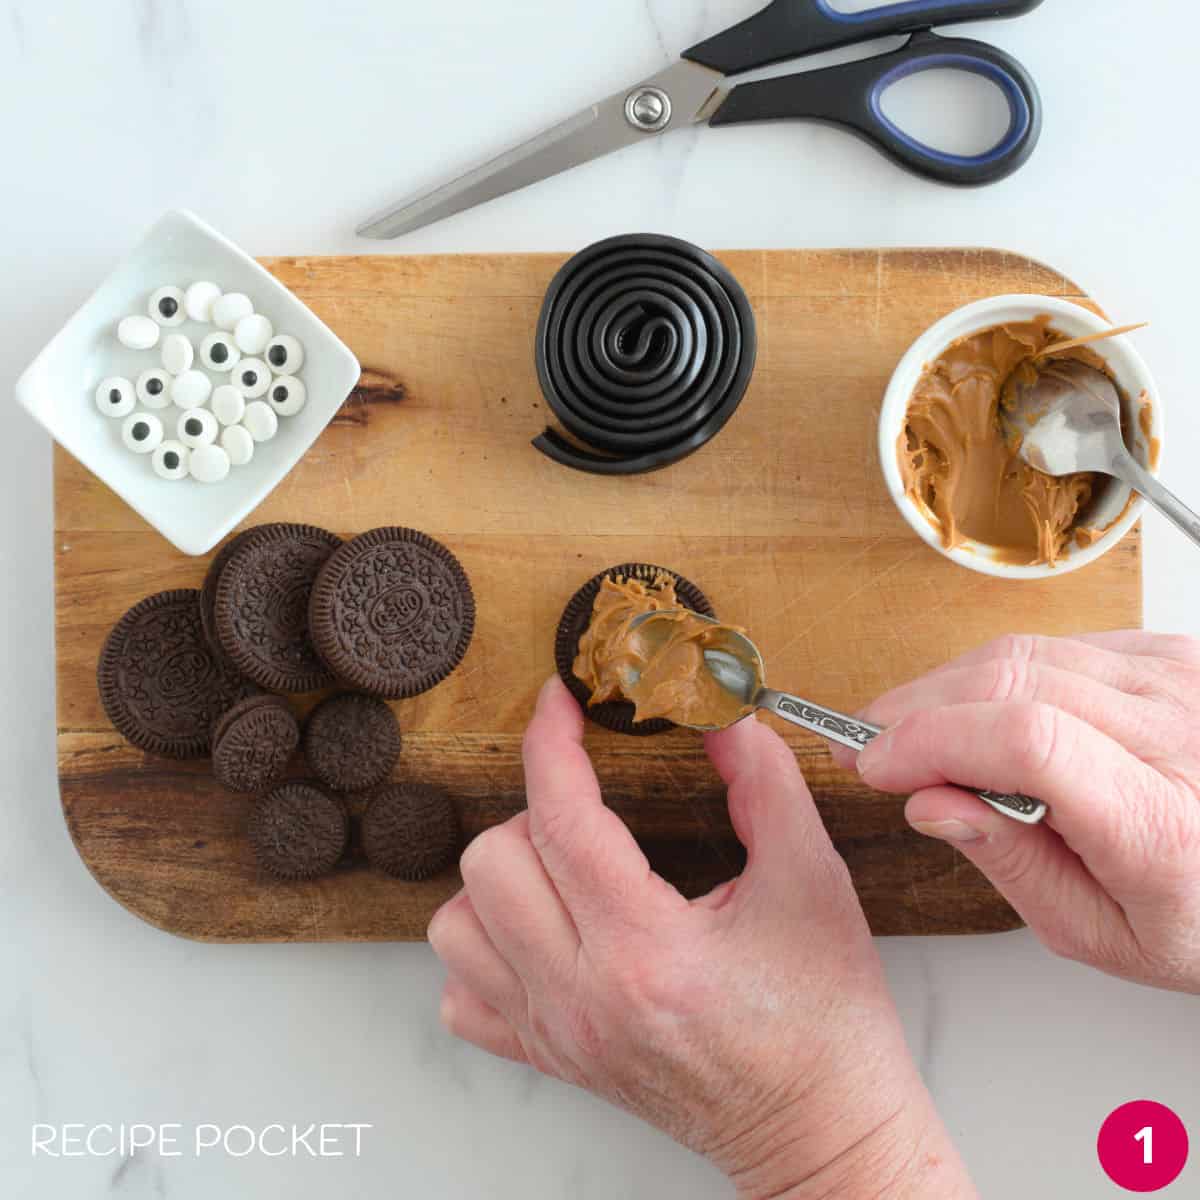 Biscoff spread being applied to the top of an Oreo cookie.